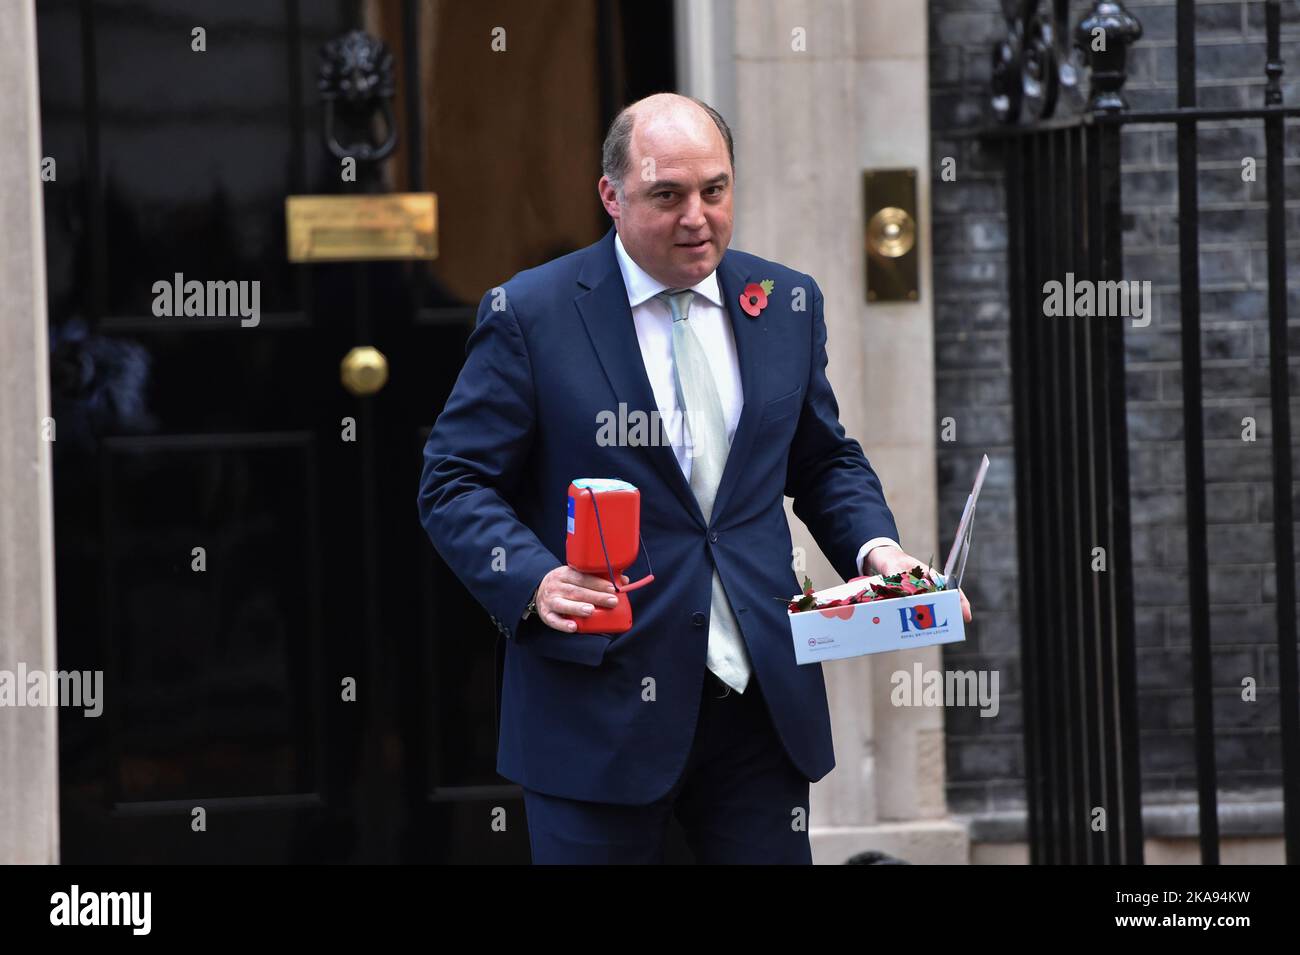 BEN WALLACE, Defense Secretary, at a cabinet meeting at 10 Downing Street, London. Secretary of State for Defense Ben Wallace offers poppies to the press as he leaves Downing Street No 10 after the weekly Cabinet Meeting. Stock Photo